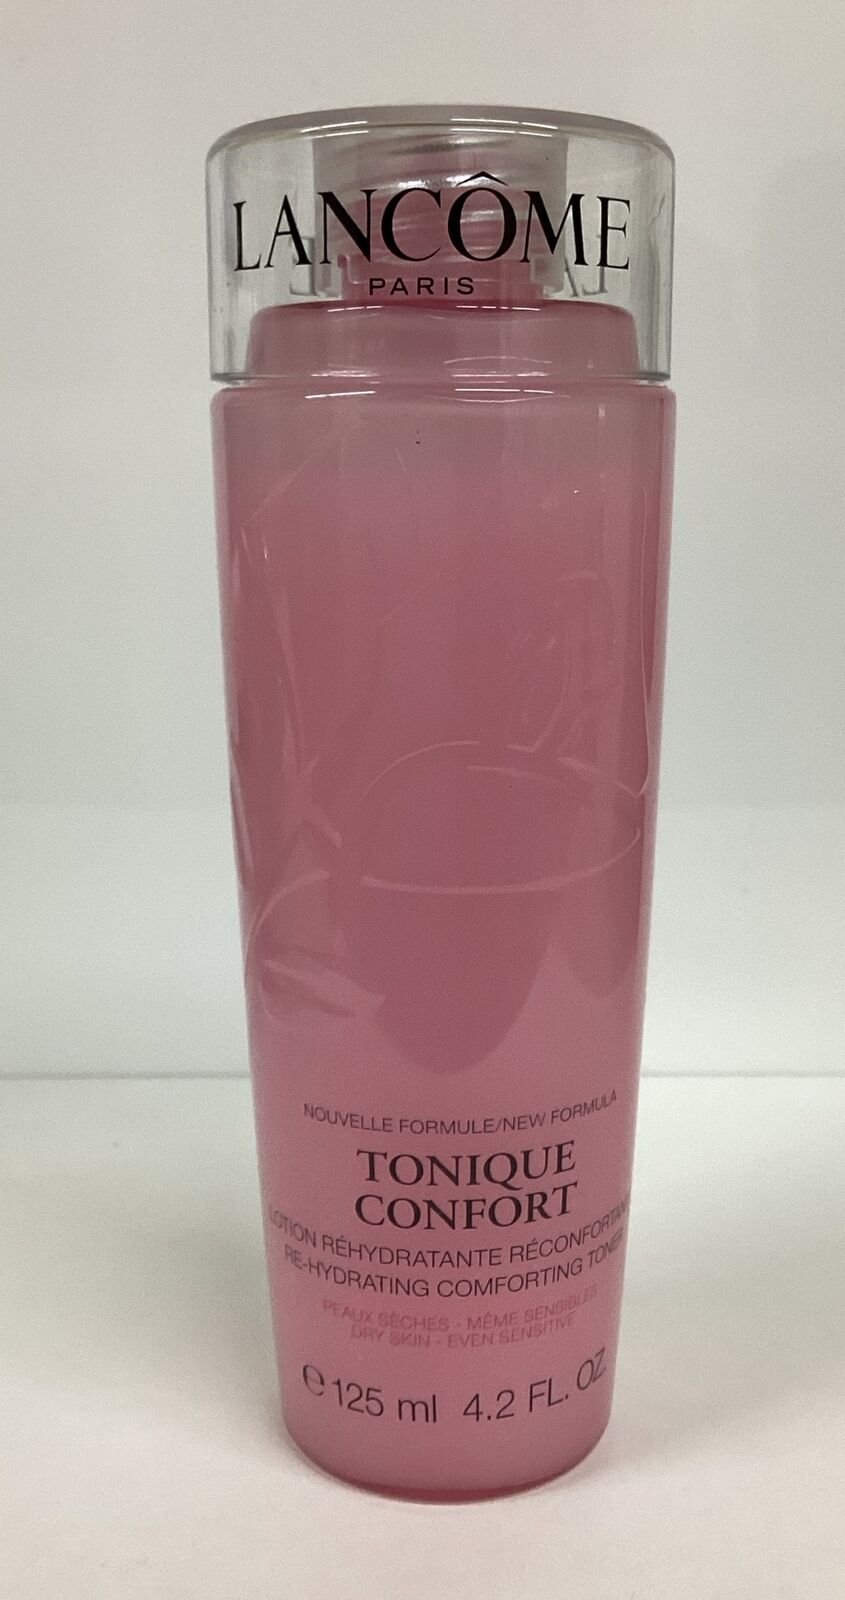 Lancome Tonique Confort Re-hydrating Comforting Toner 4.2 Oz As Pictured 